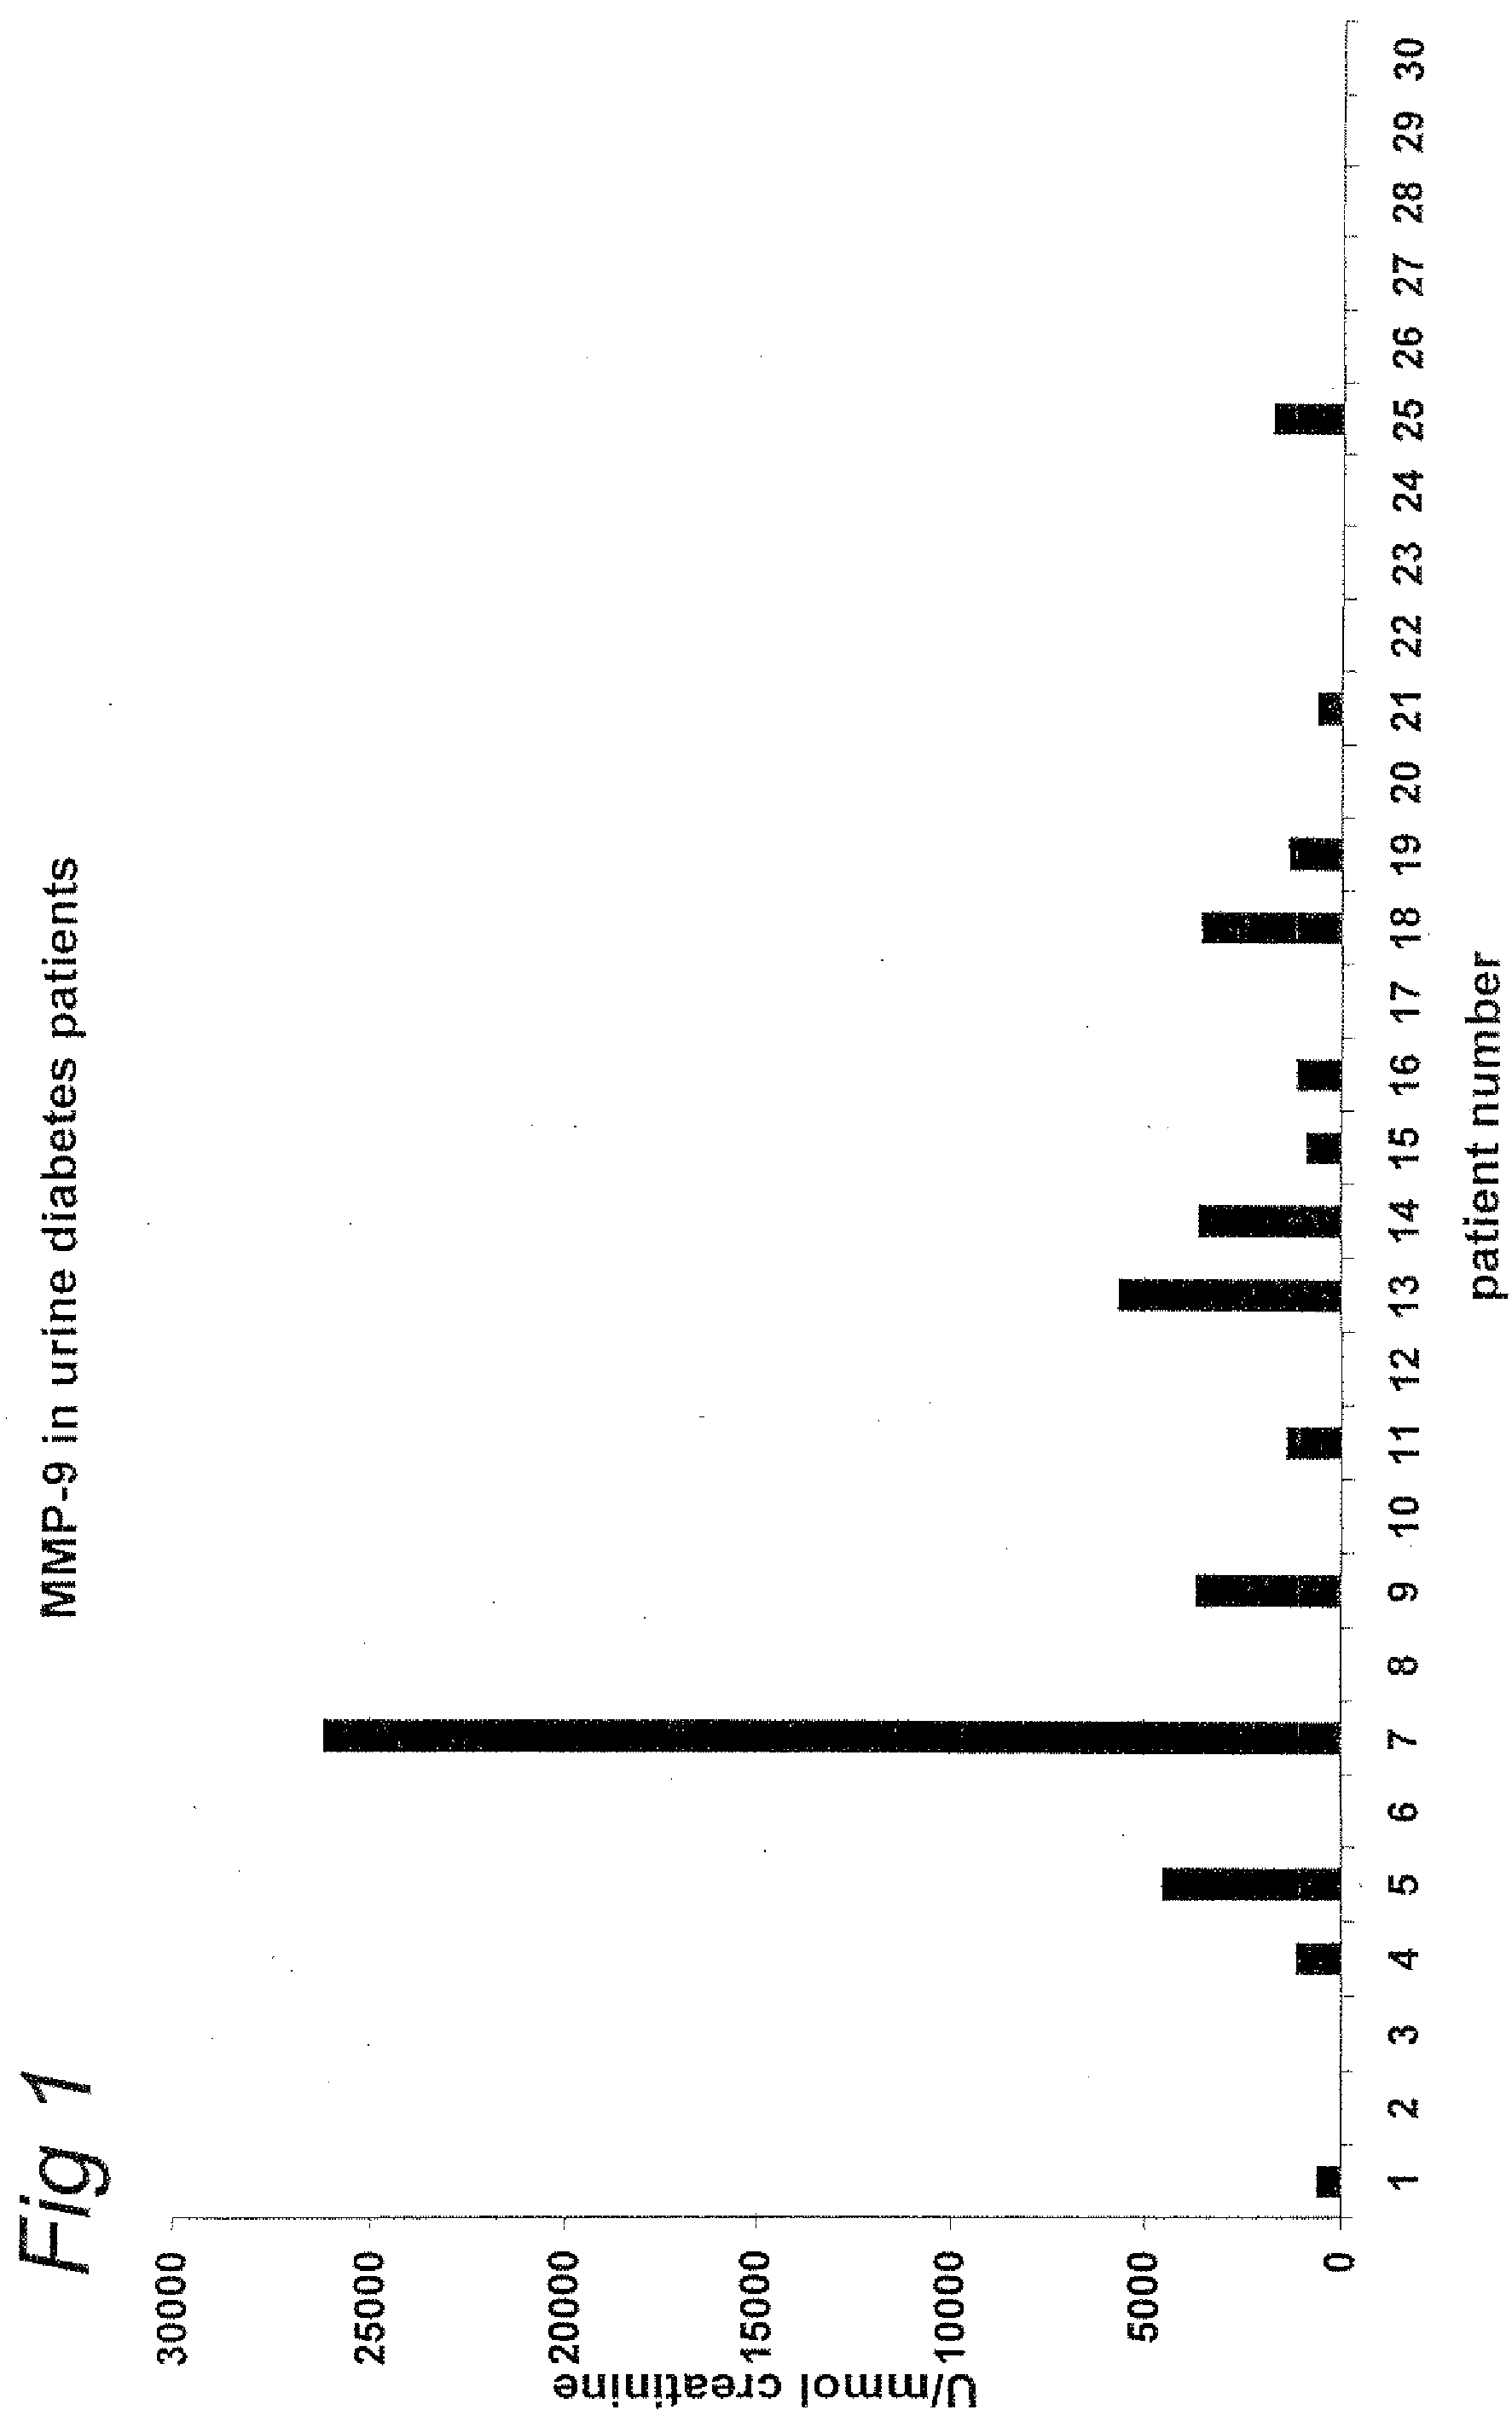 Proteolytic enzymes in urine as diagnostic parameters in diseases involving matrix remodelling